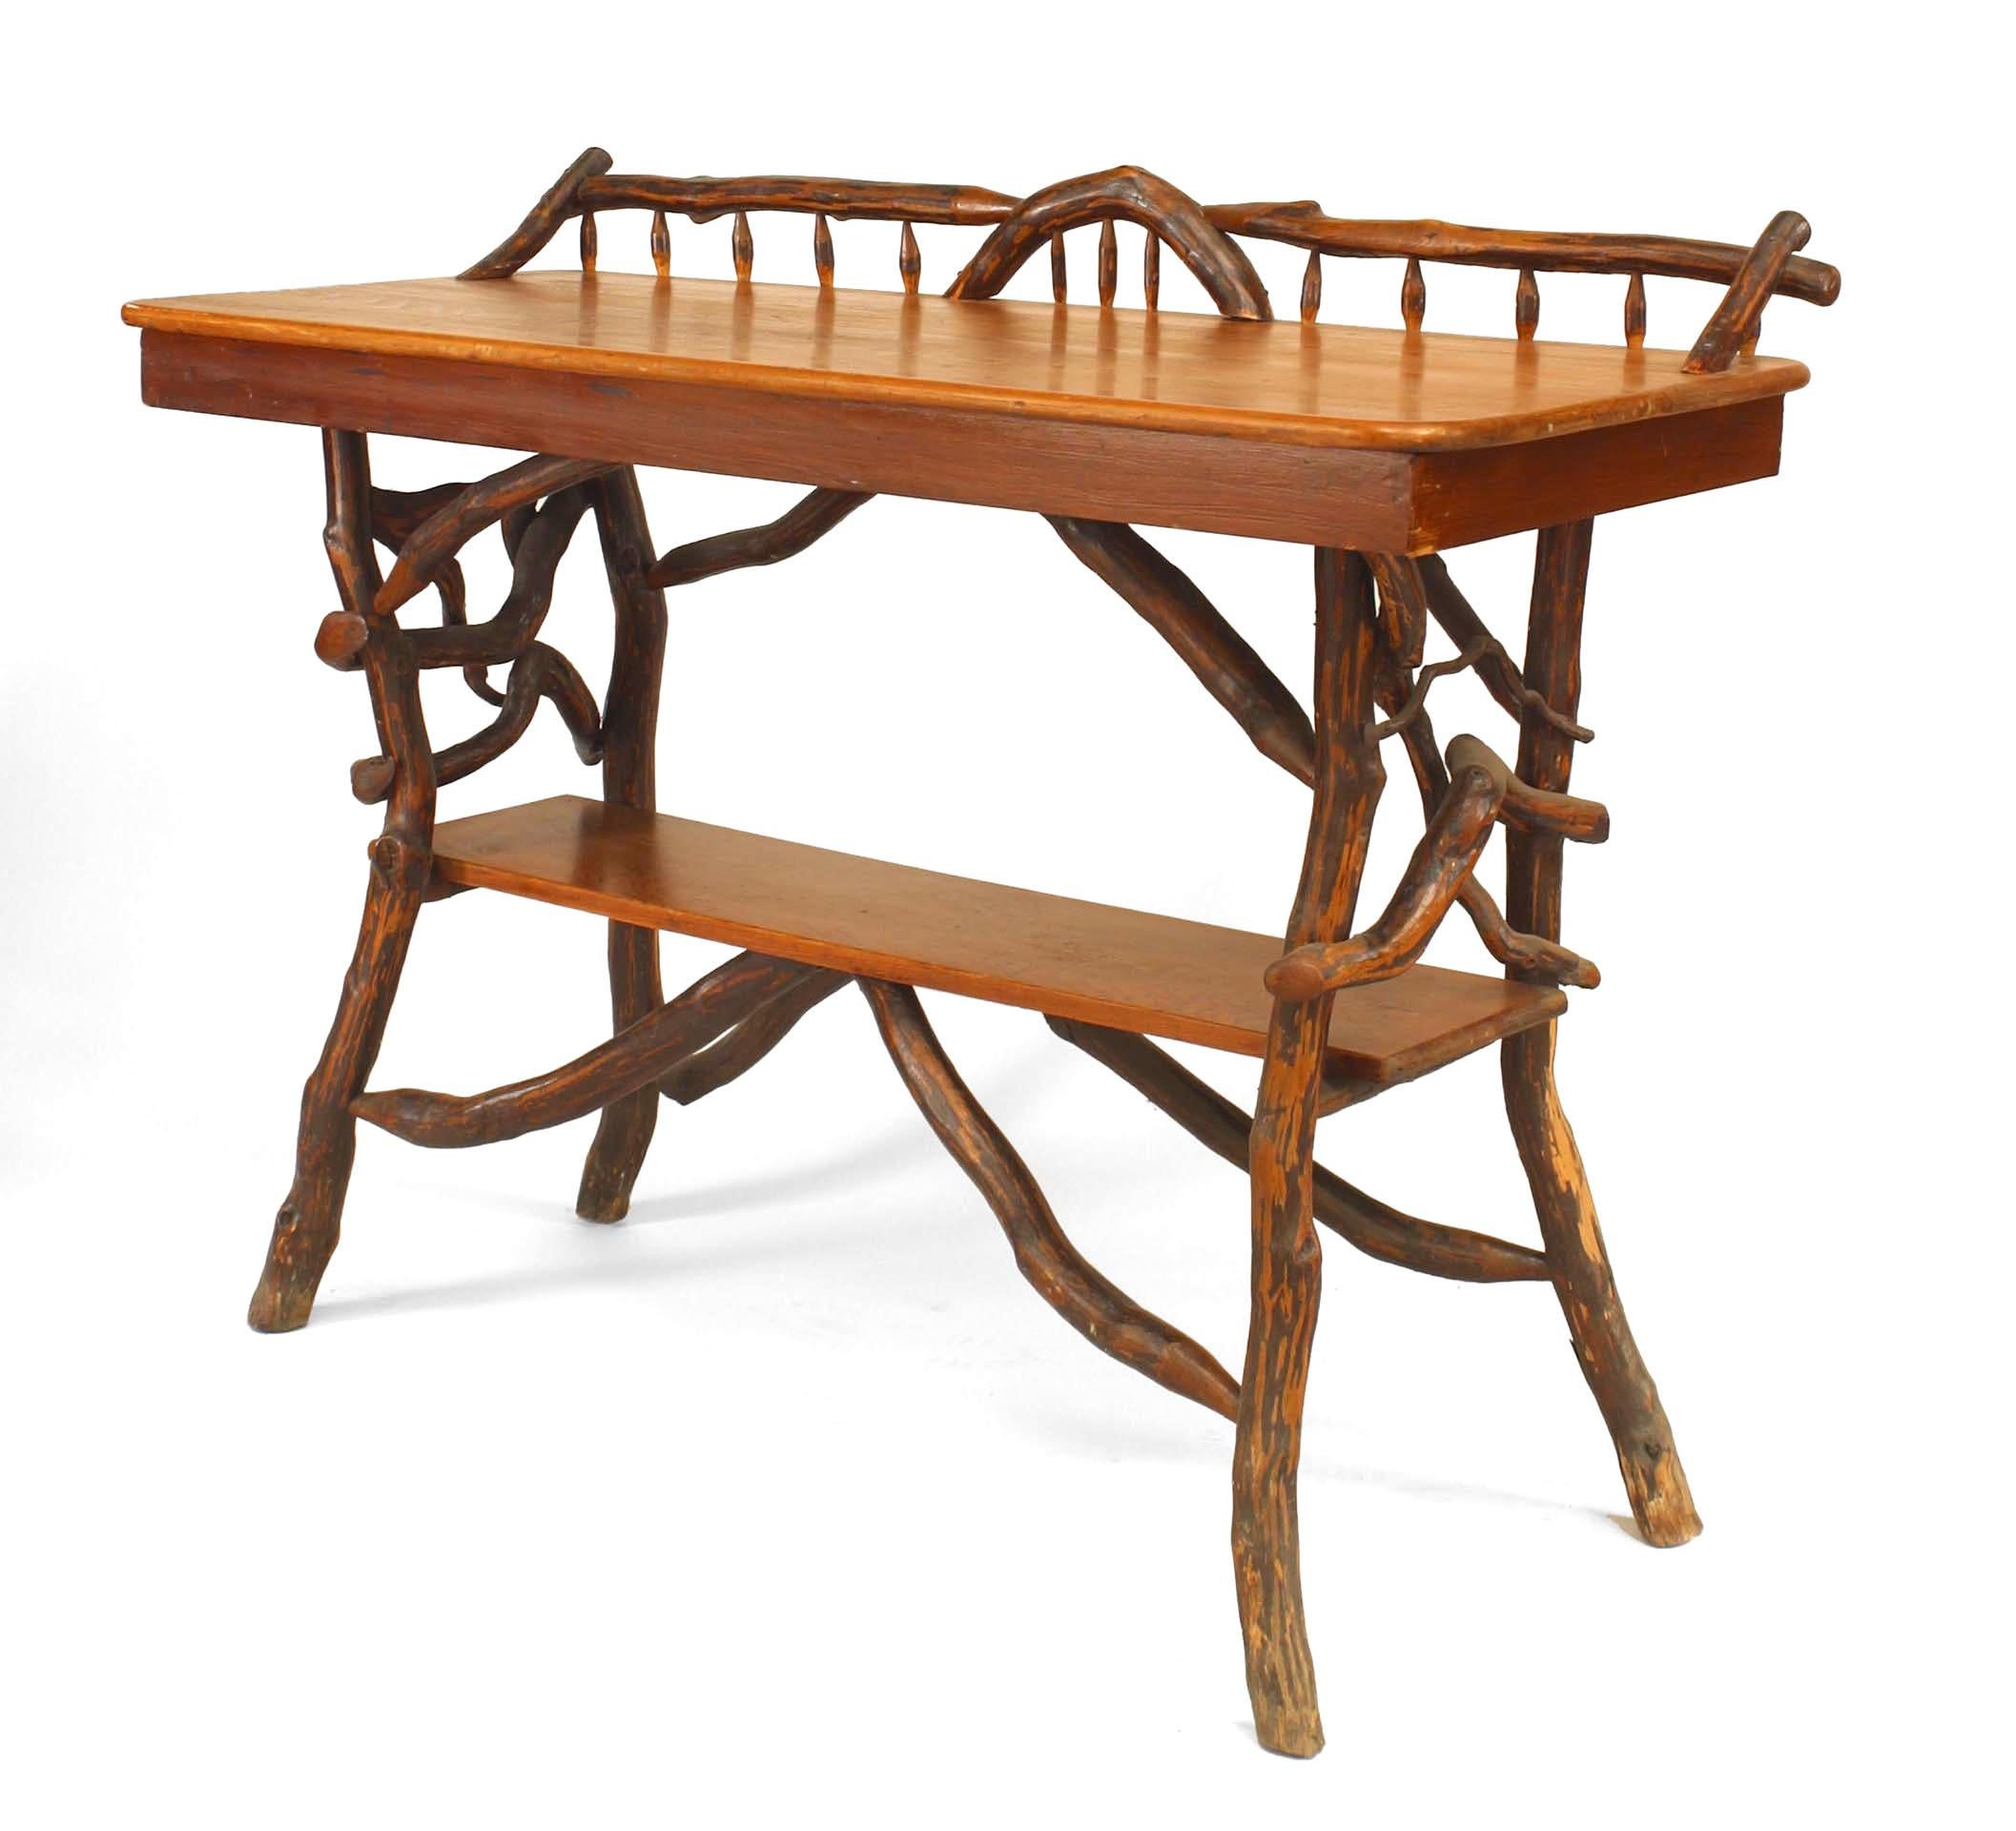 American Rustic Adirondack serving table of twig & root construction with gallery above a rectangular pine top & under-tier. (Attributed to BEN DAVIS, c.1920, North Carolina)
